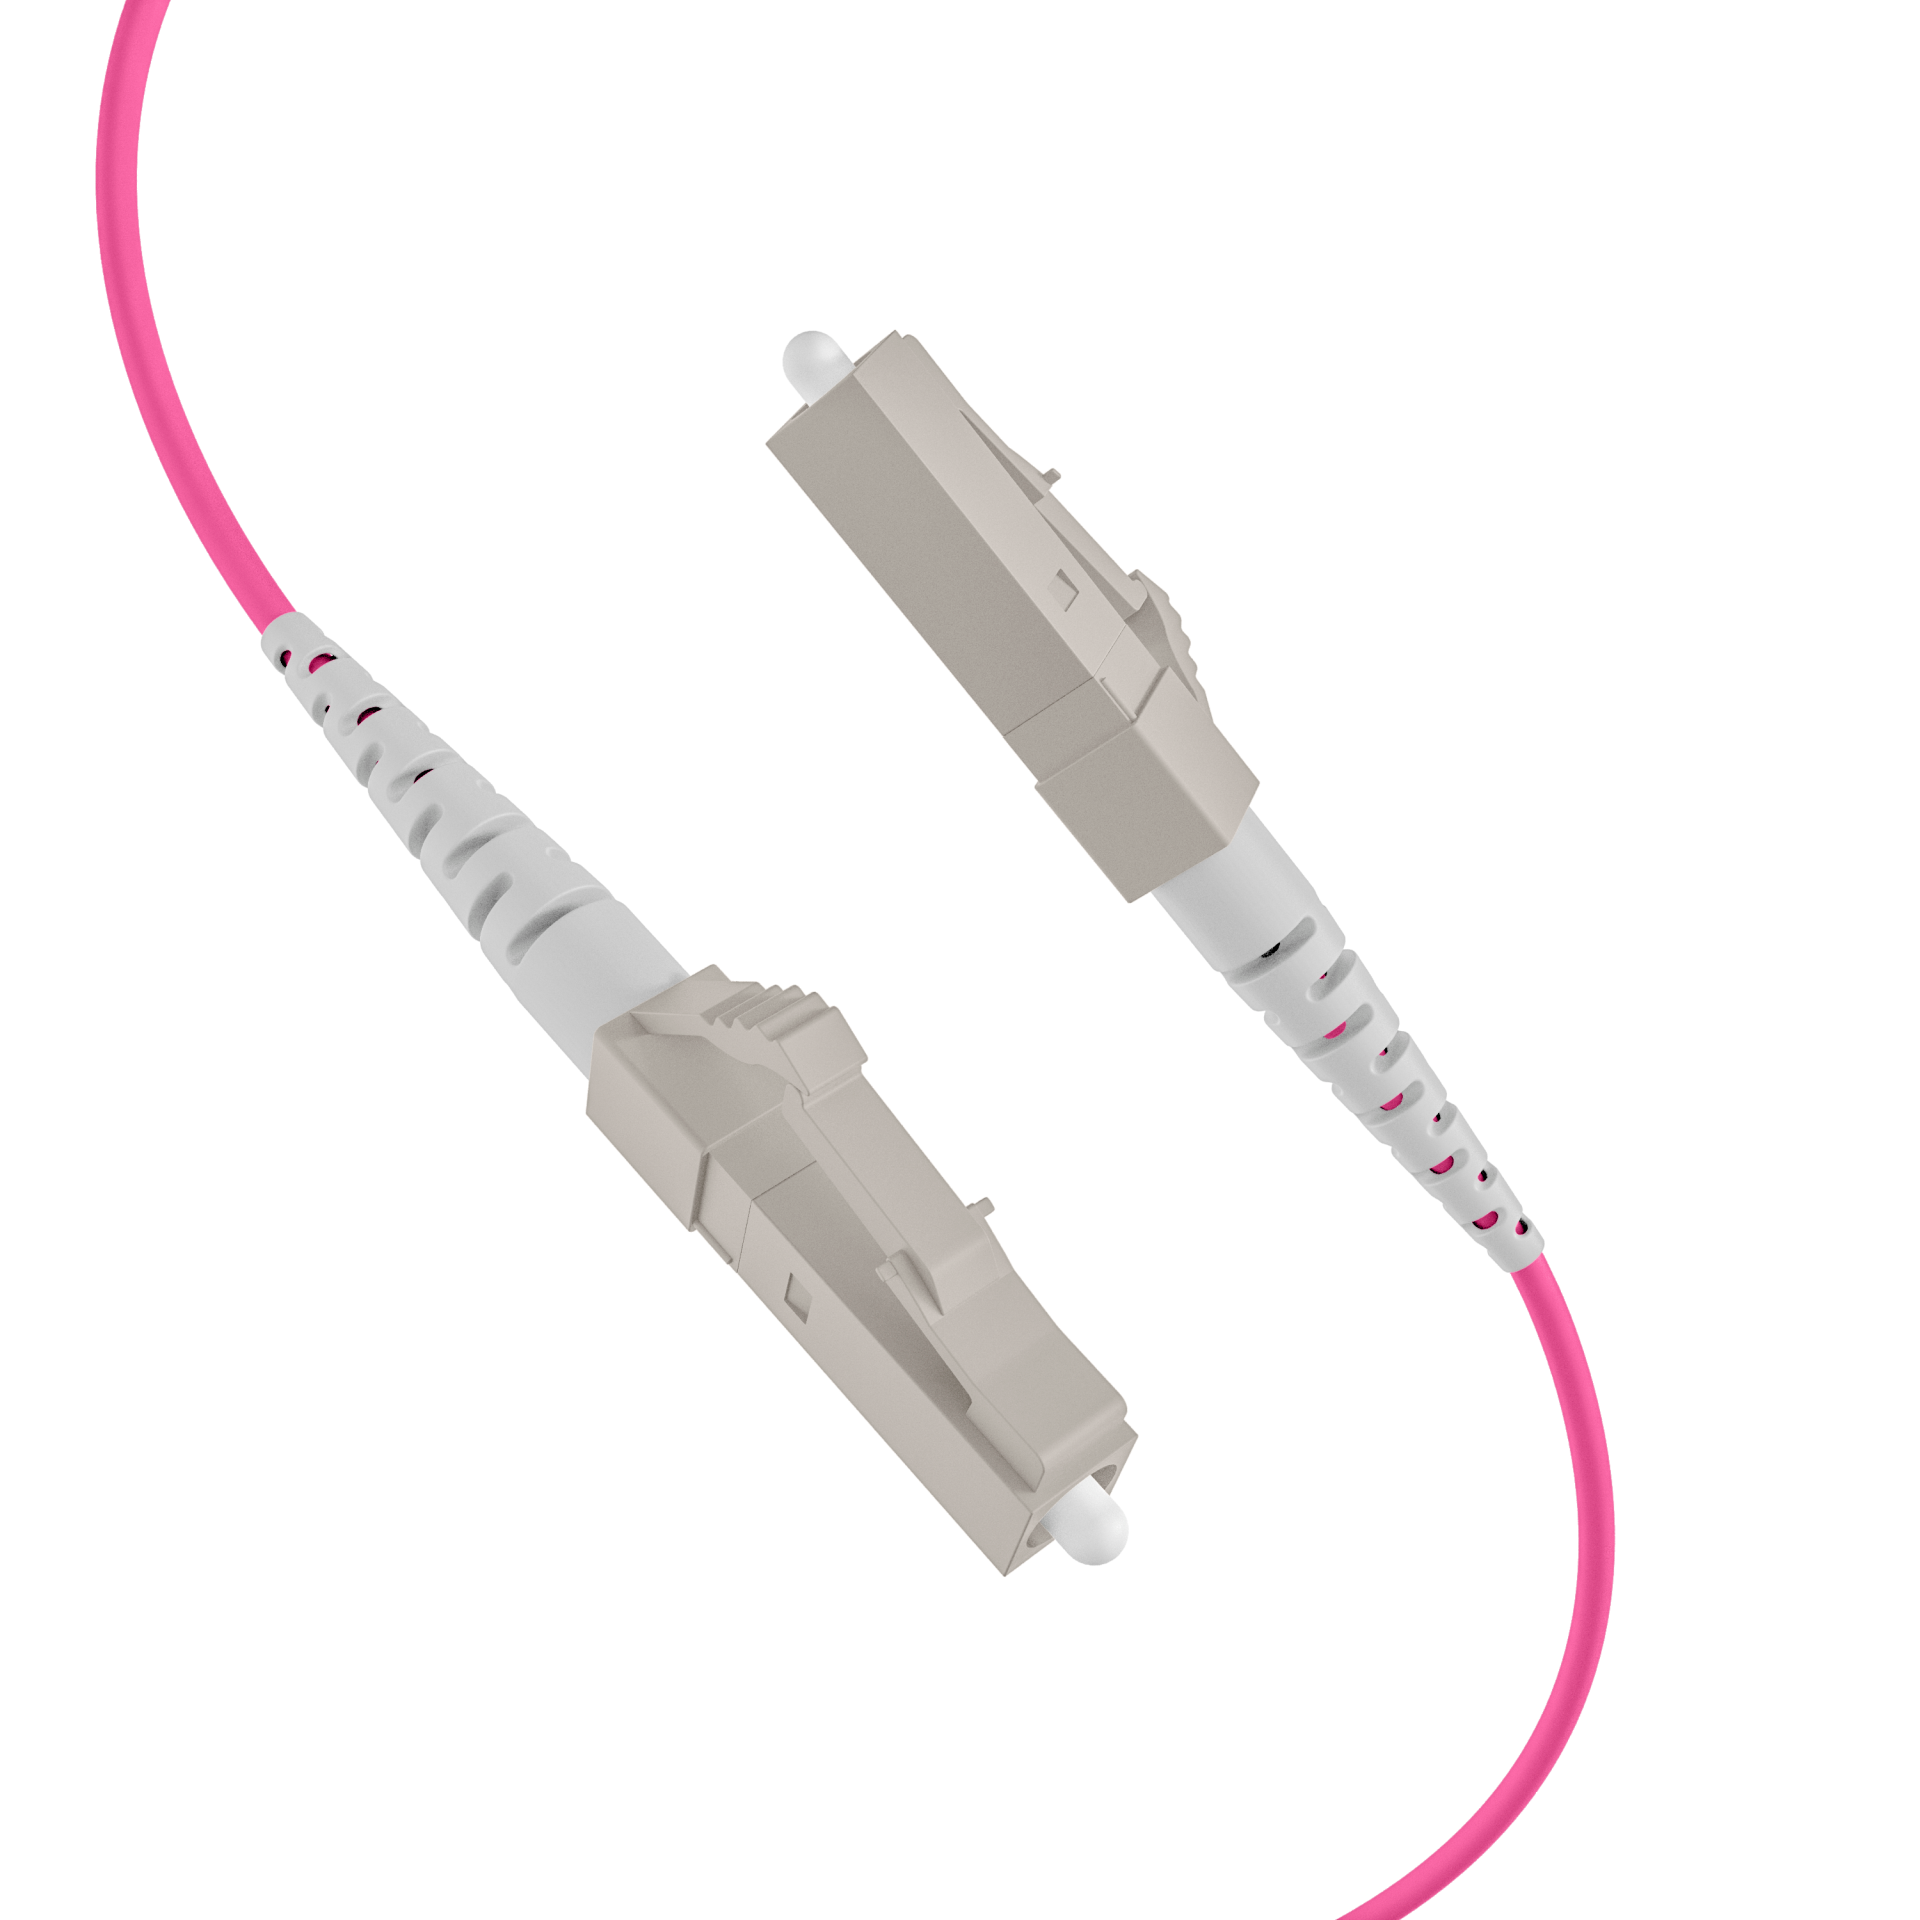 Trunkcable U-DQ(ZN)BH OM4 12G (1x12) LC-LC,190m Dca LSZH